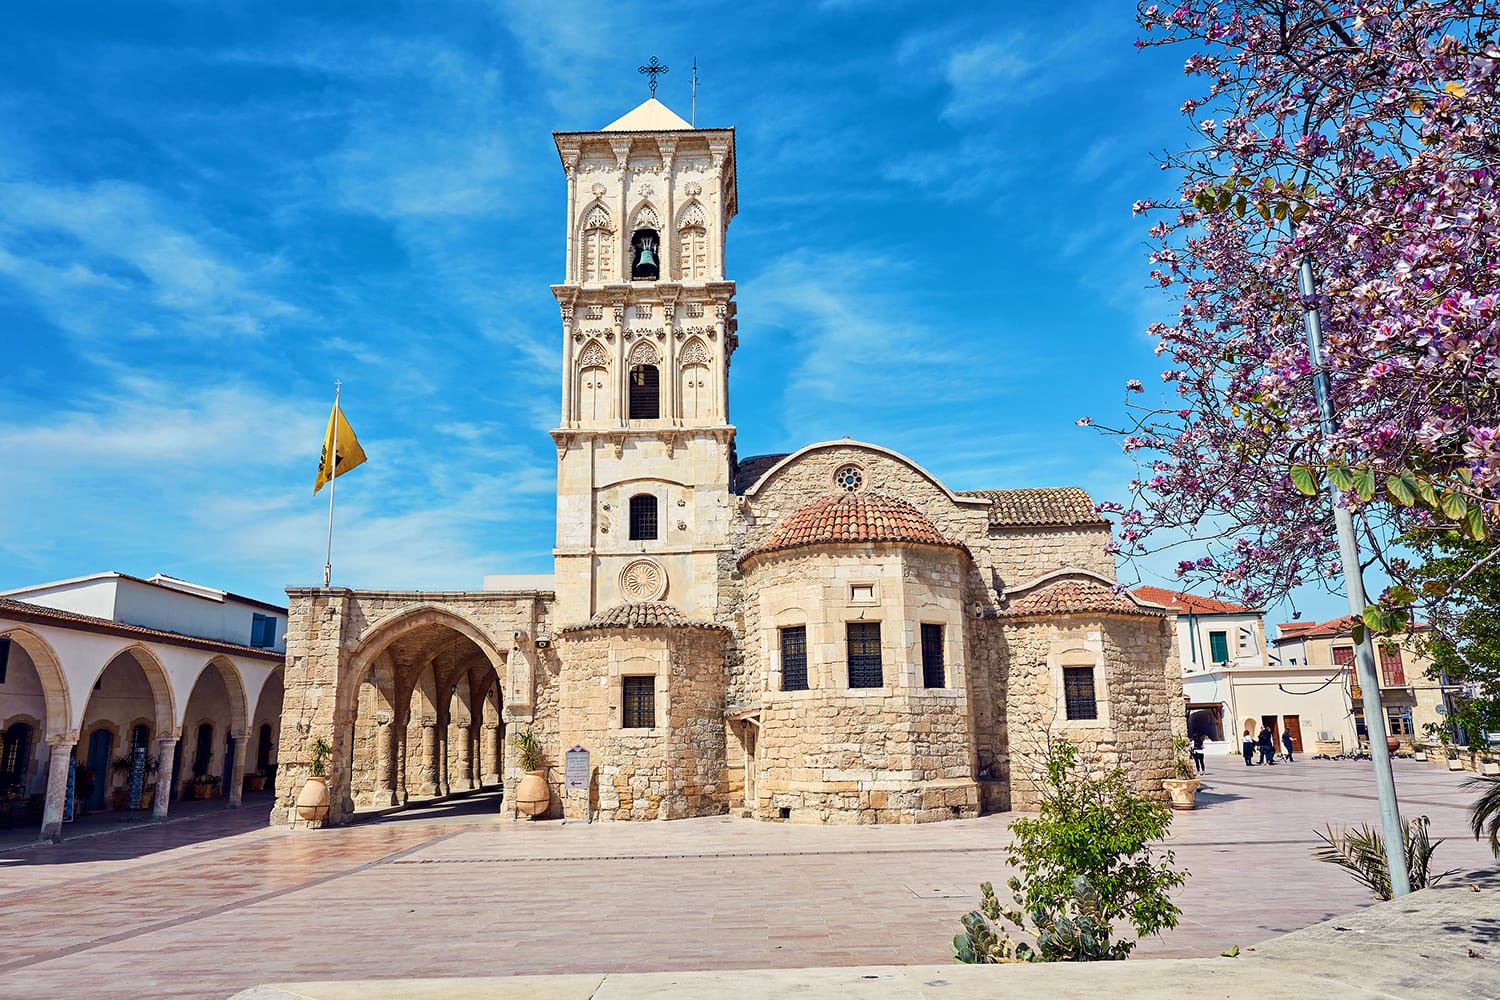 The front of the Church of Saint Lazarus, a late-9th century church in Larnaca, Cyprus